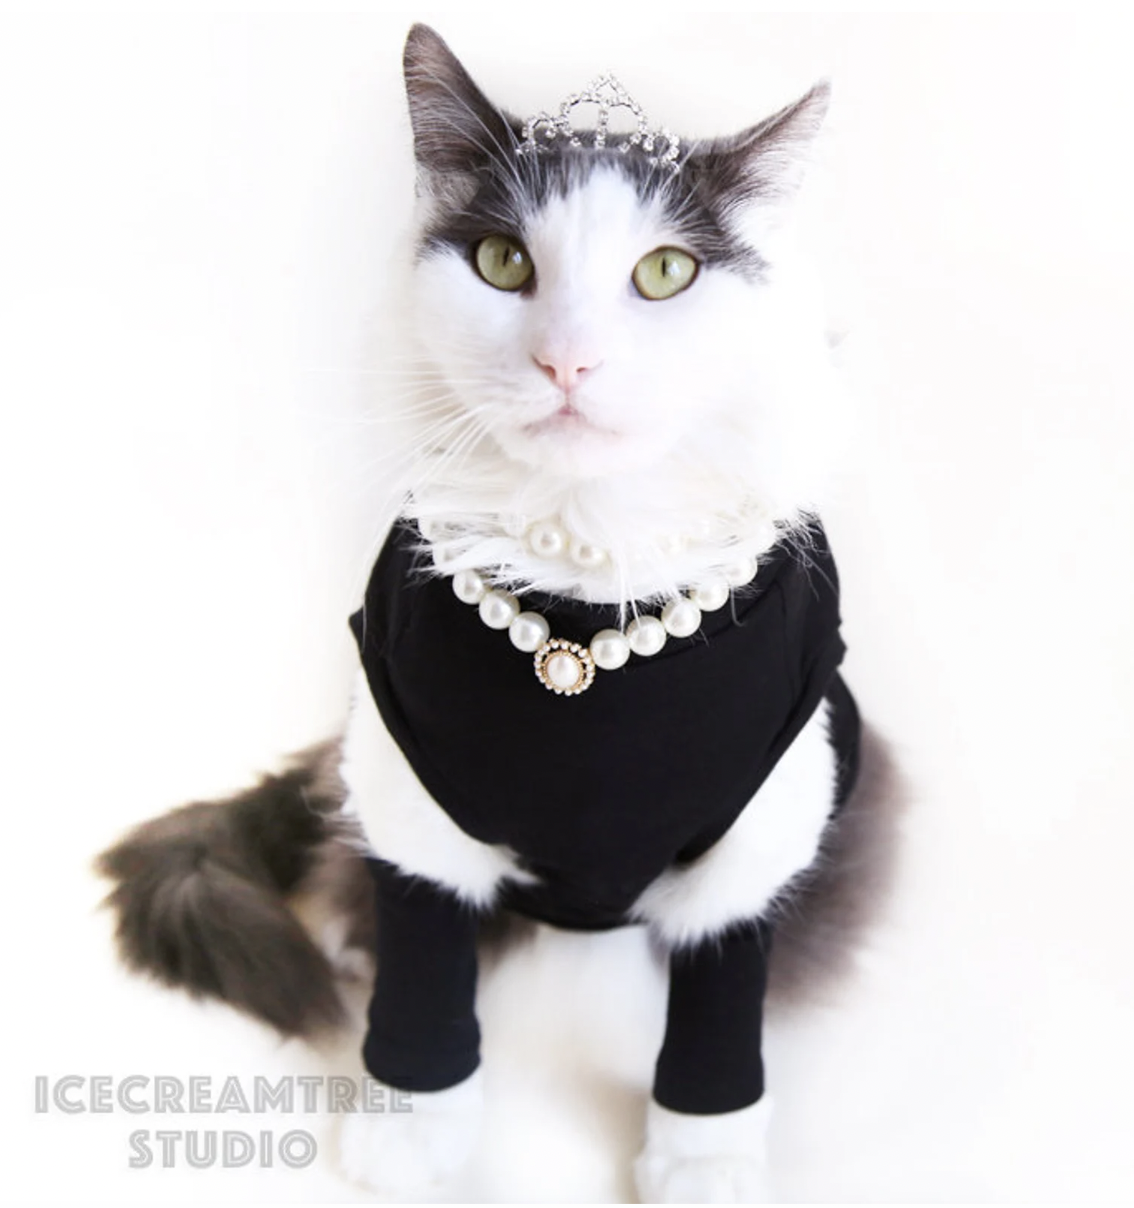 White and gray cat in a black dress, pearl necklace, and tiara like Audrey Hepburn in Breakfast at Tiffany's